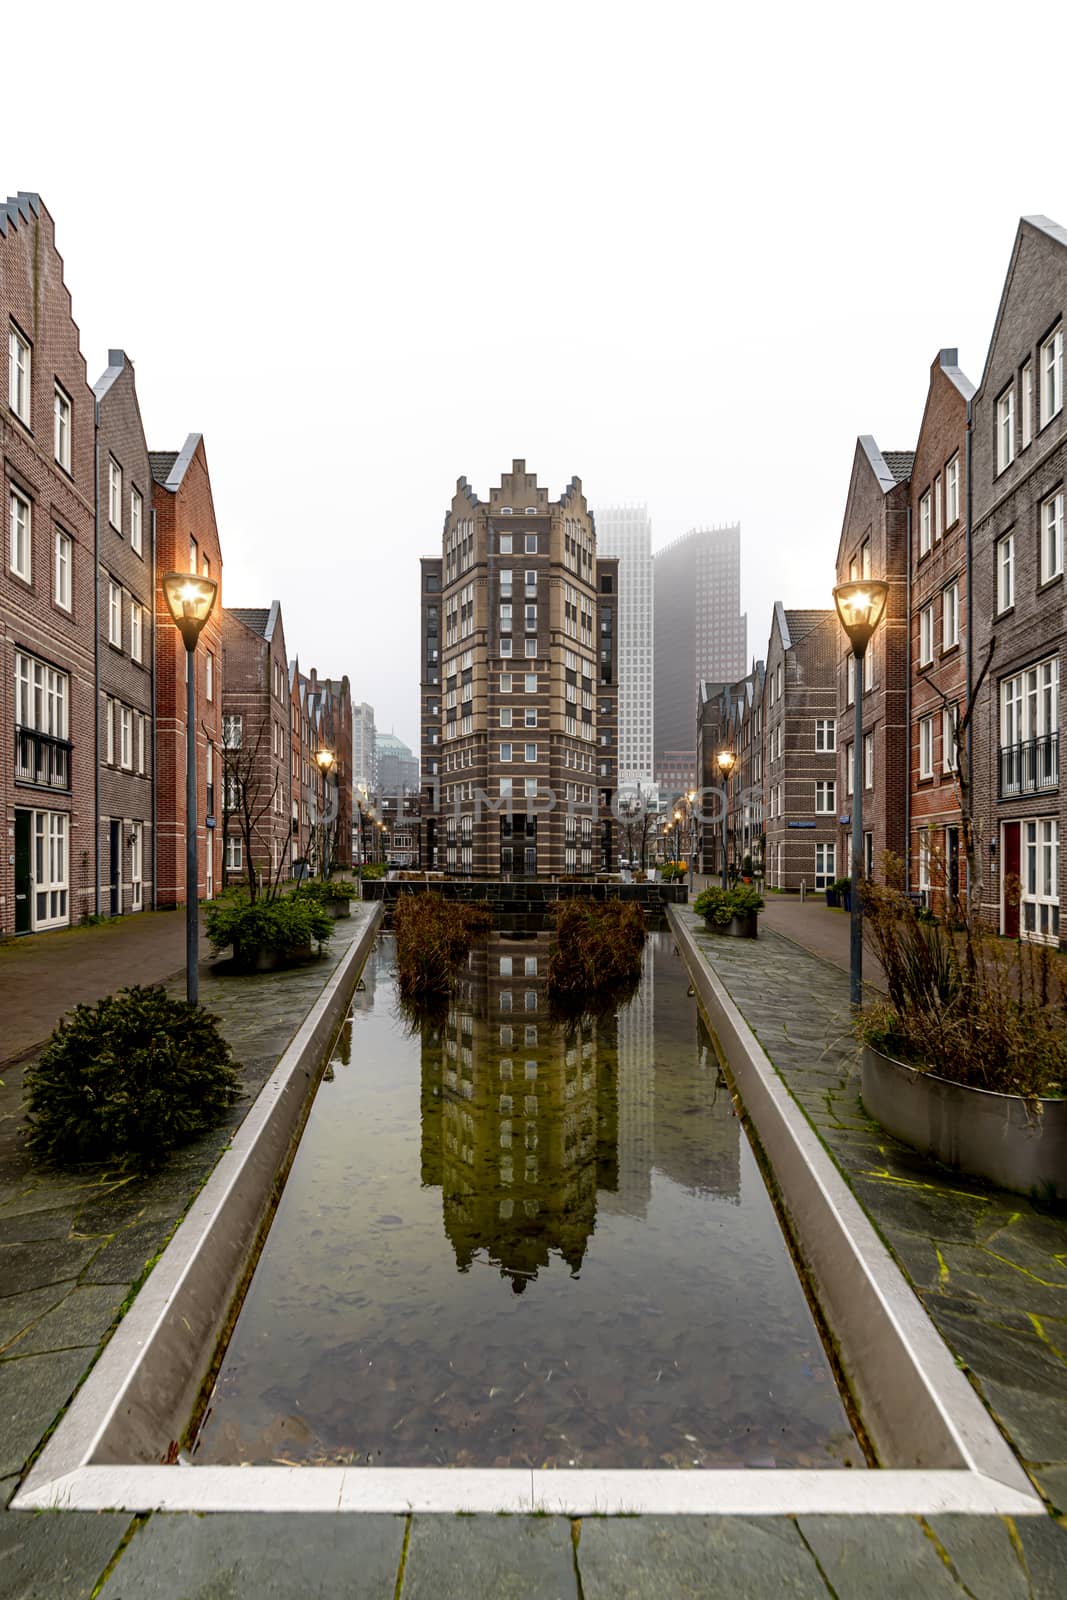 View of the Dutch architecture in a quiet and calm resident area of The Hague, Netherlands